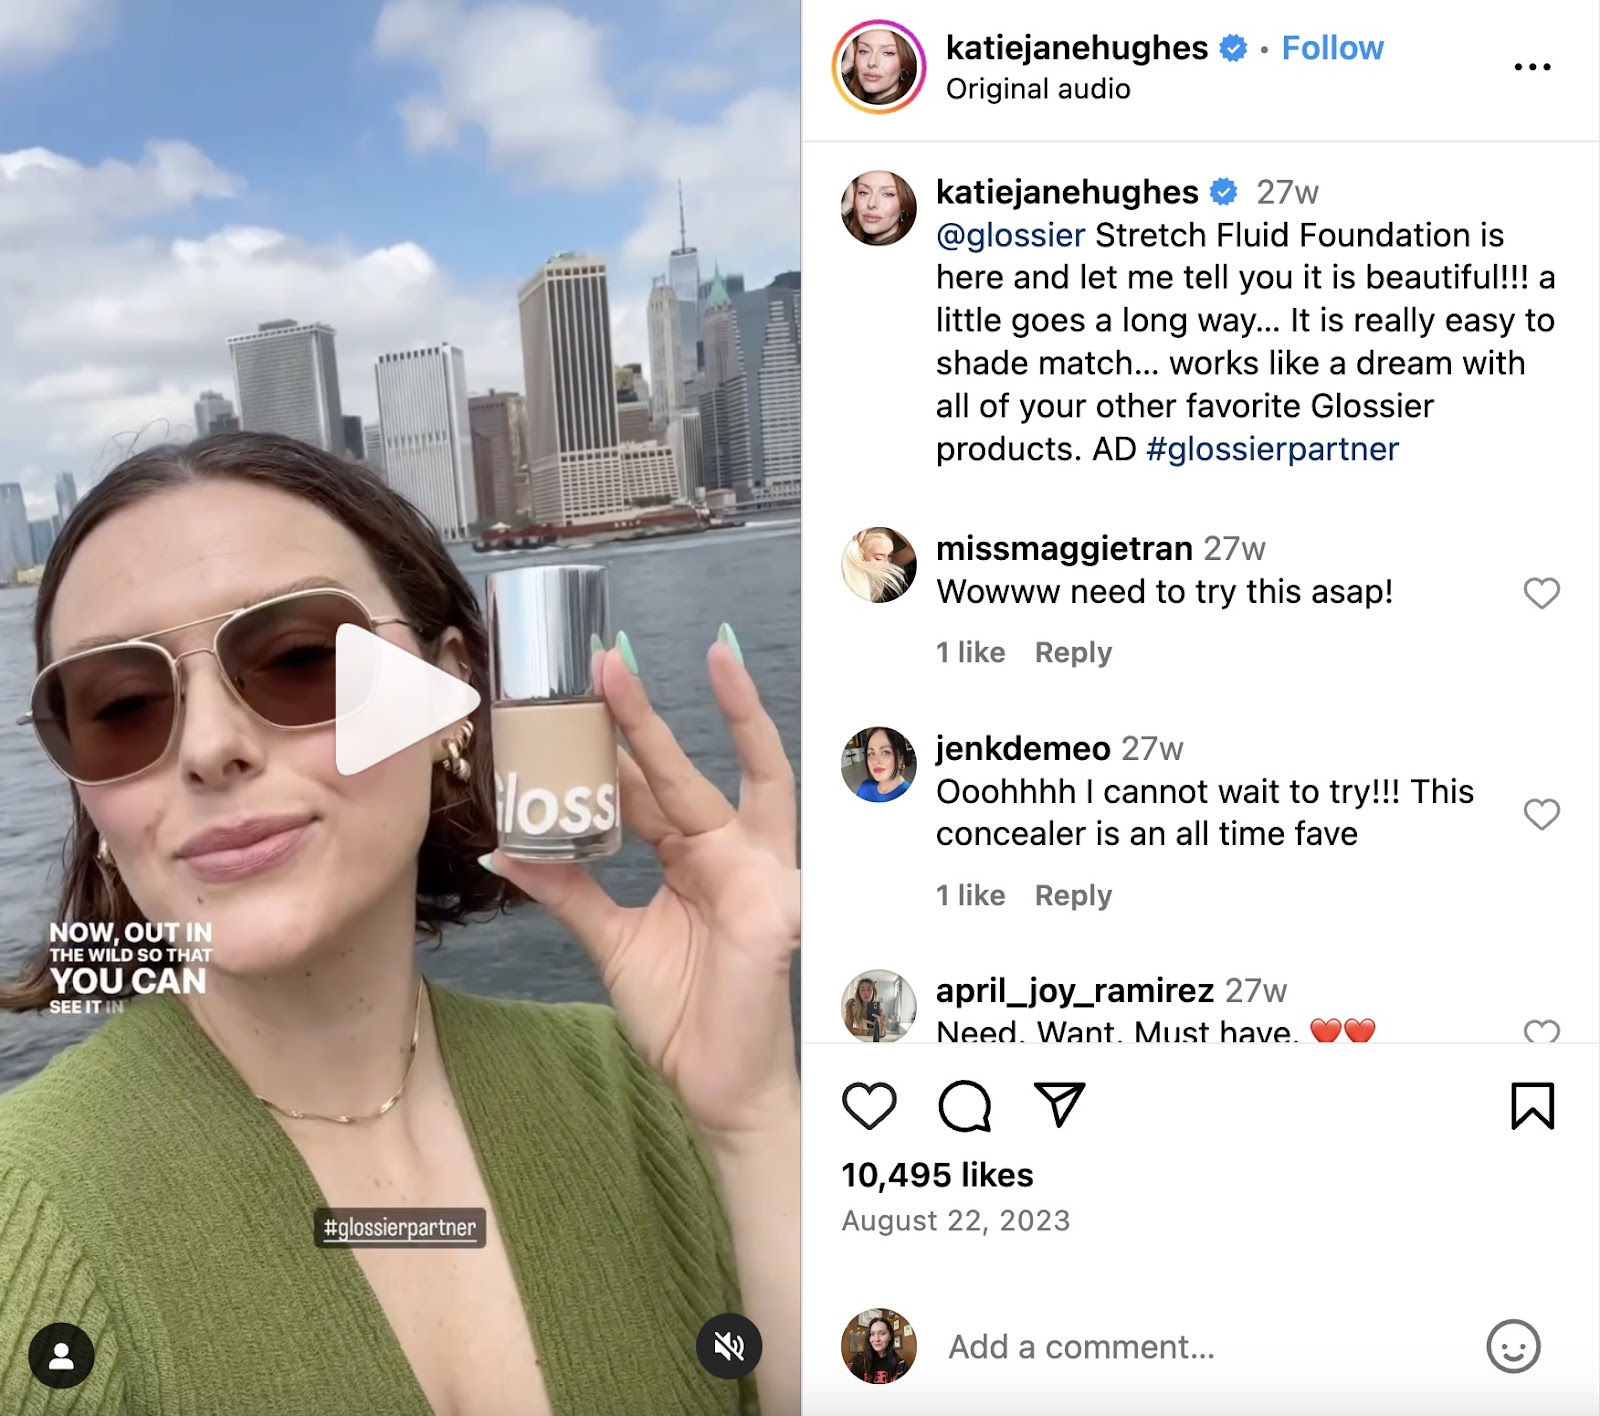 @katiejanehughes video station  connected  Instagram, promoting Glossier's foundation